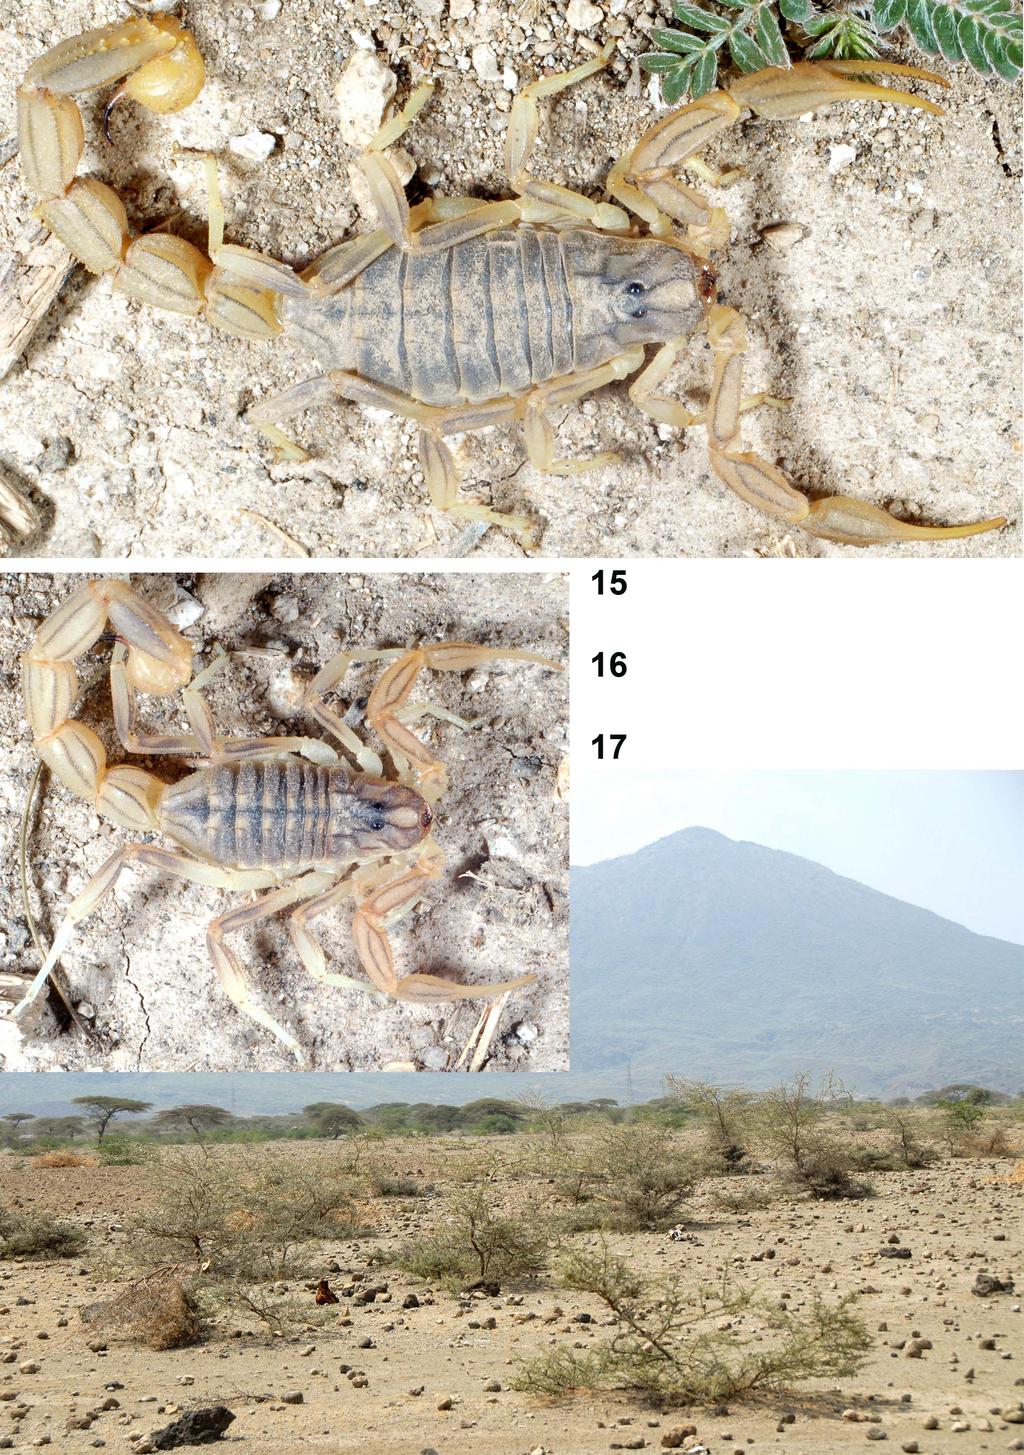 Kovařík: New Buthus from Ethiopia 3 Figures 15 17: 15. Female paratype of Buthus awashensis sp. n. at the type locality. 16. Male paratype of Buthus awashensis sp. n. at the type locality. 17. Ethiopia, Awash, Metahara env.